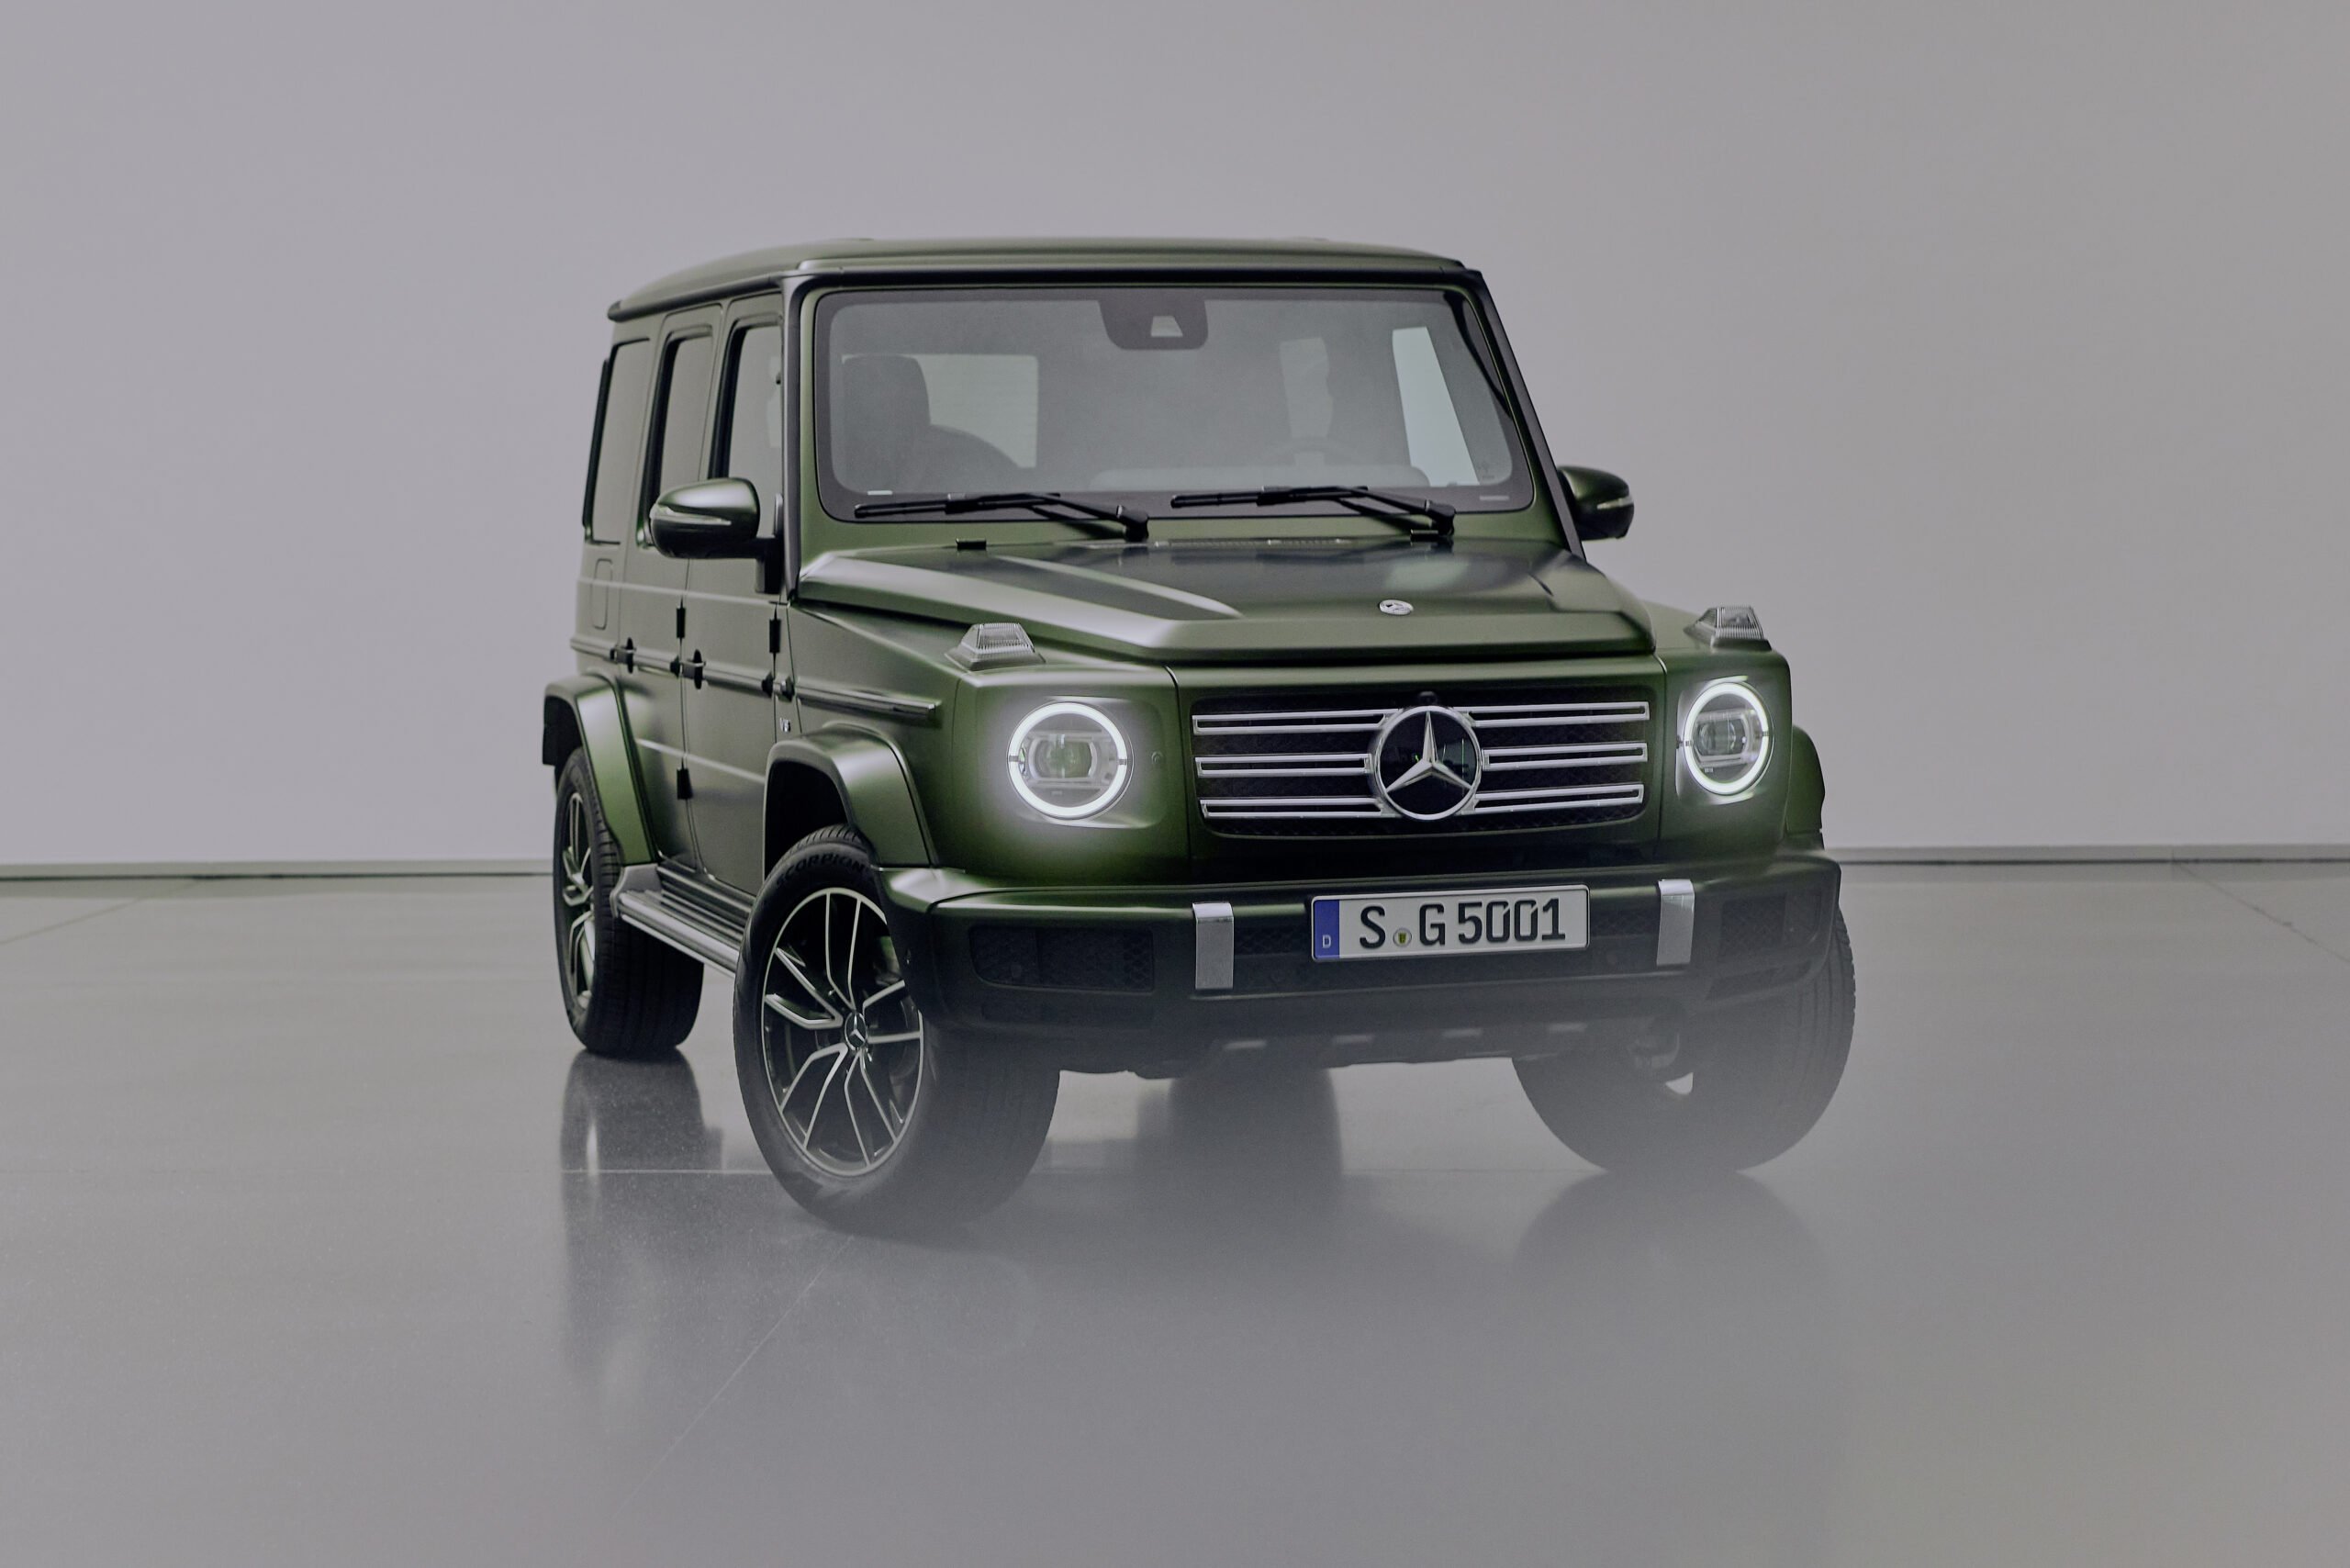 "Final Edition" of the Mercedes-Benz G 500